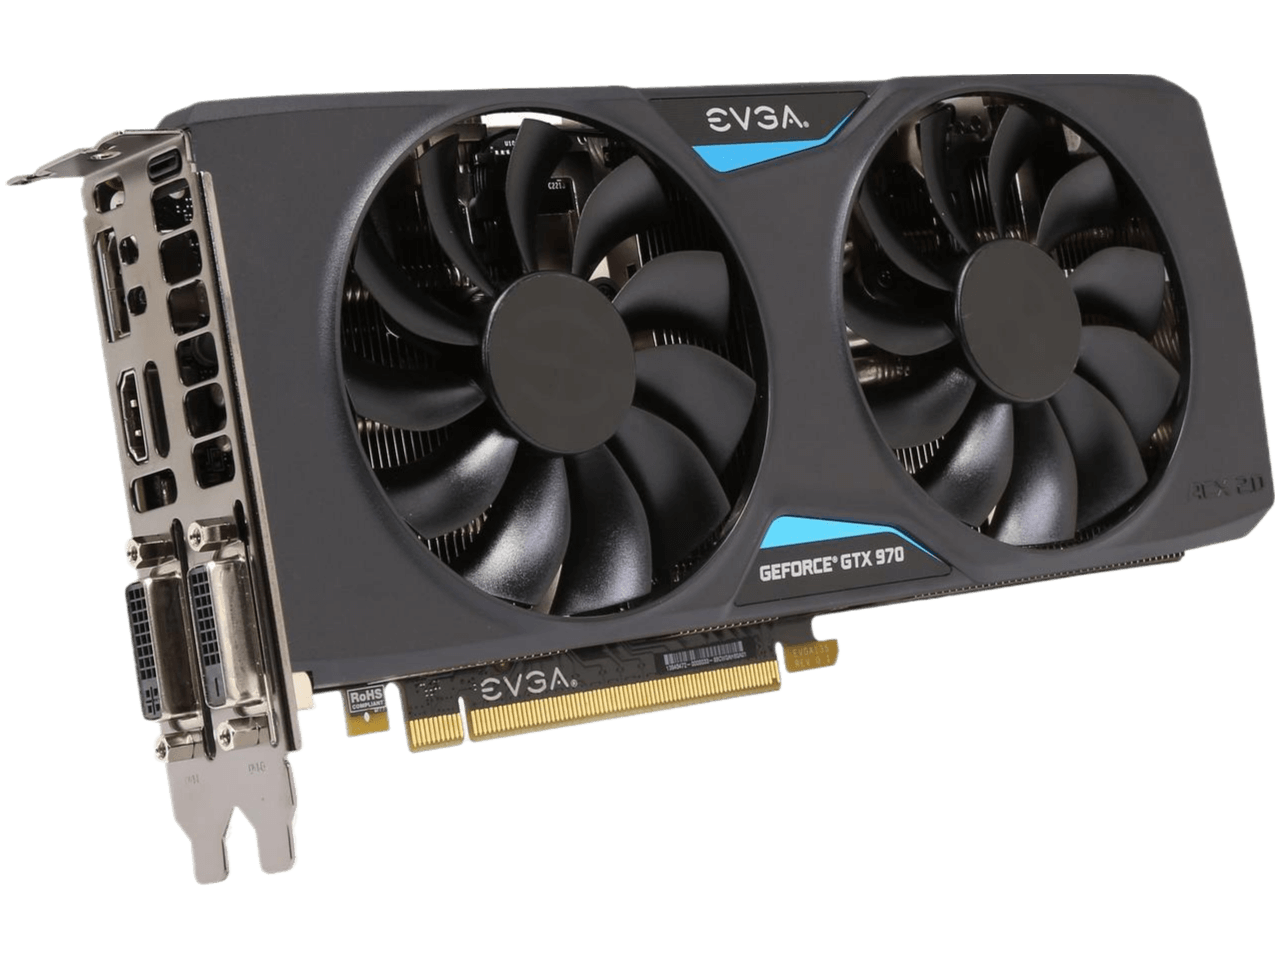 EVGA GeForce GTX 970 4GB FTW+ GAMING w/ACX 2.0+ Whisper Silent Cooling w/ Free Installed Backplate Graphics Card 04G-P4-3978-KR